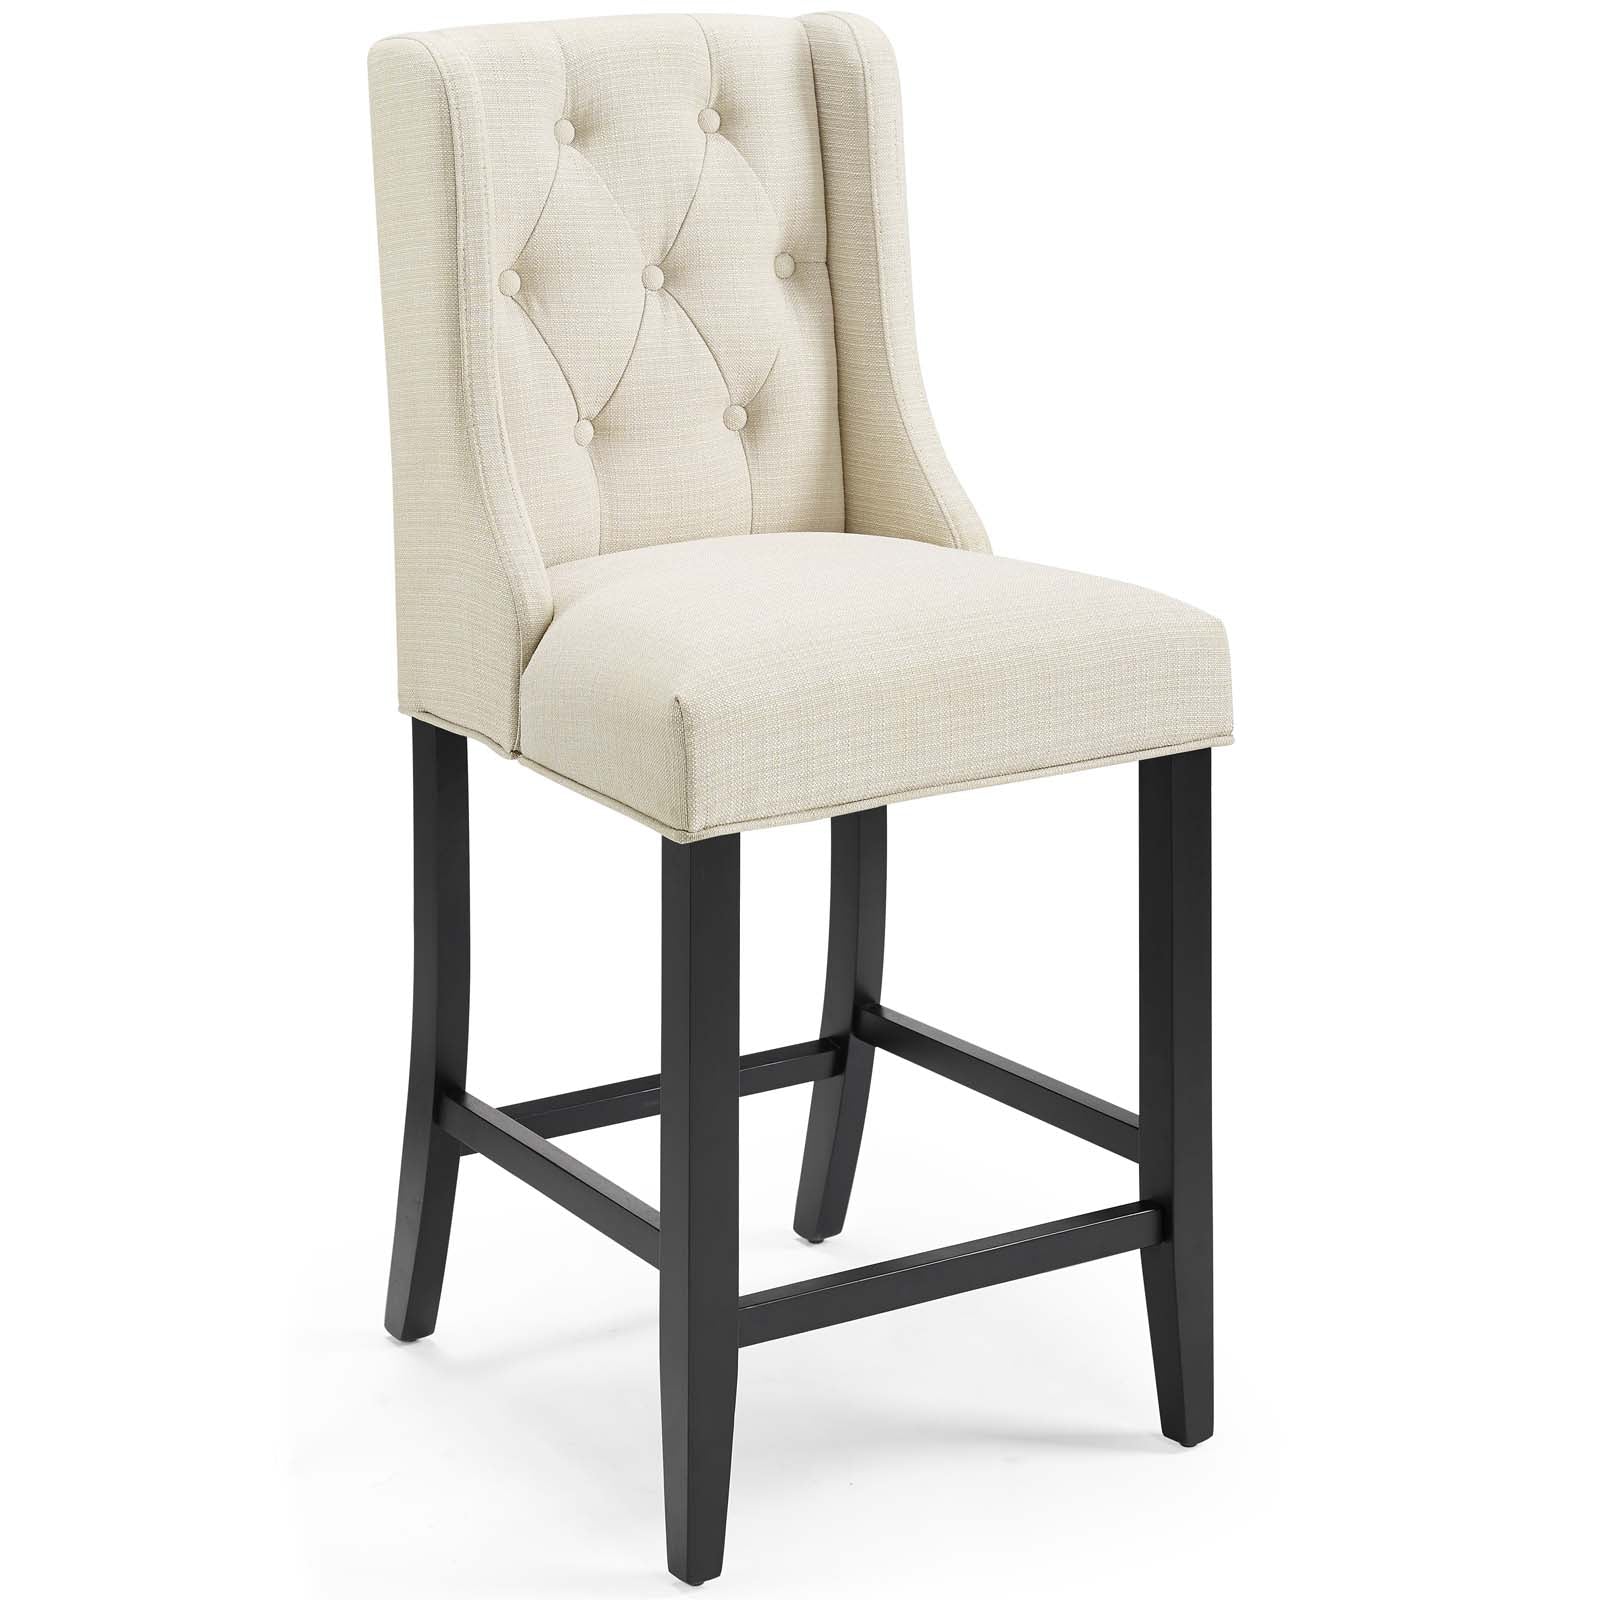 Baronet Tufted Button Upholstered Fabric Counter Stool - East Shore Modern Home Furnishings